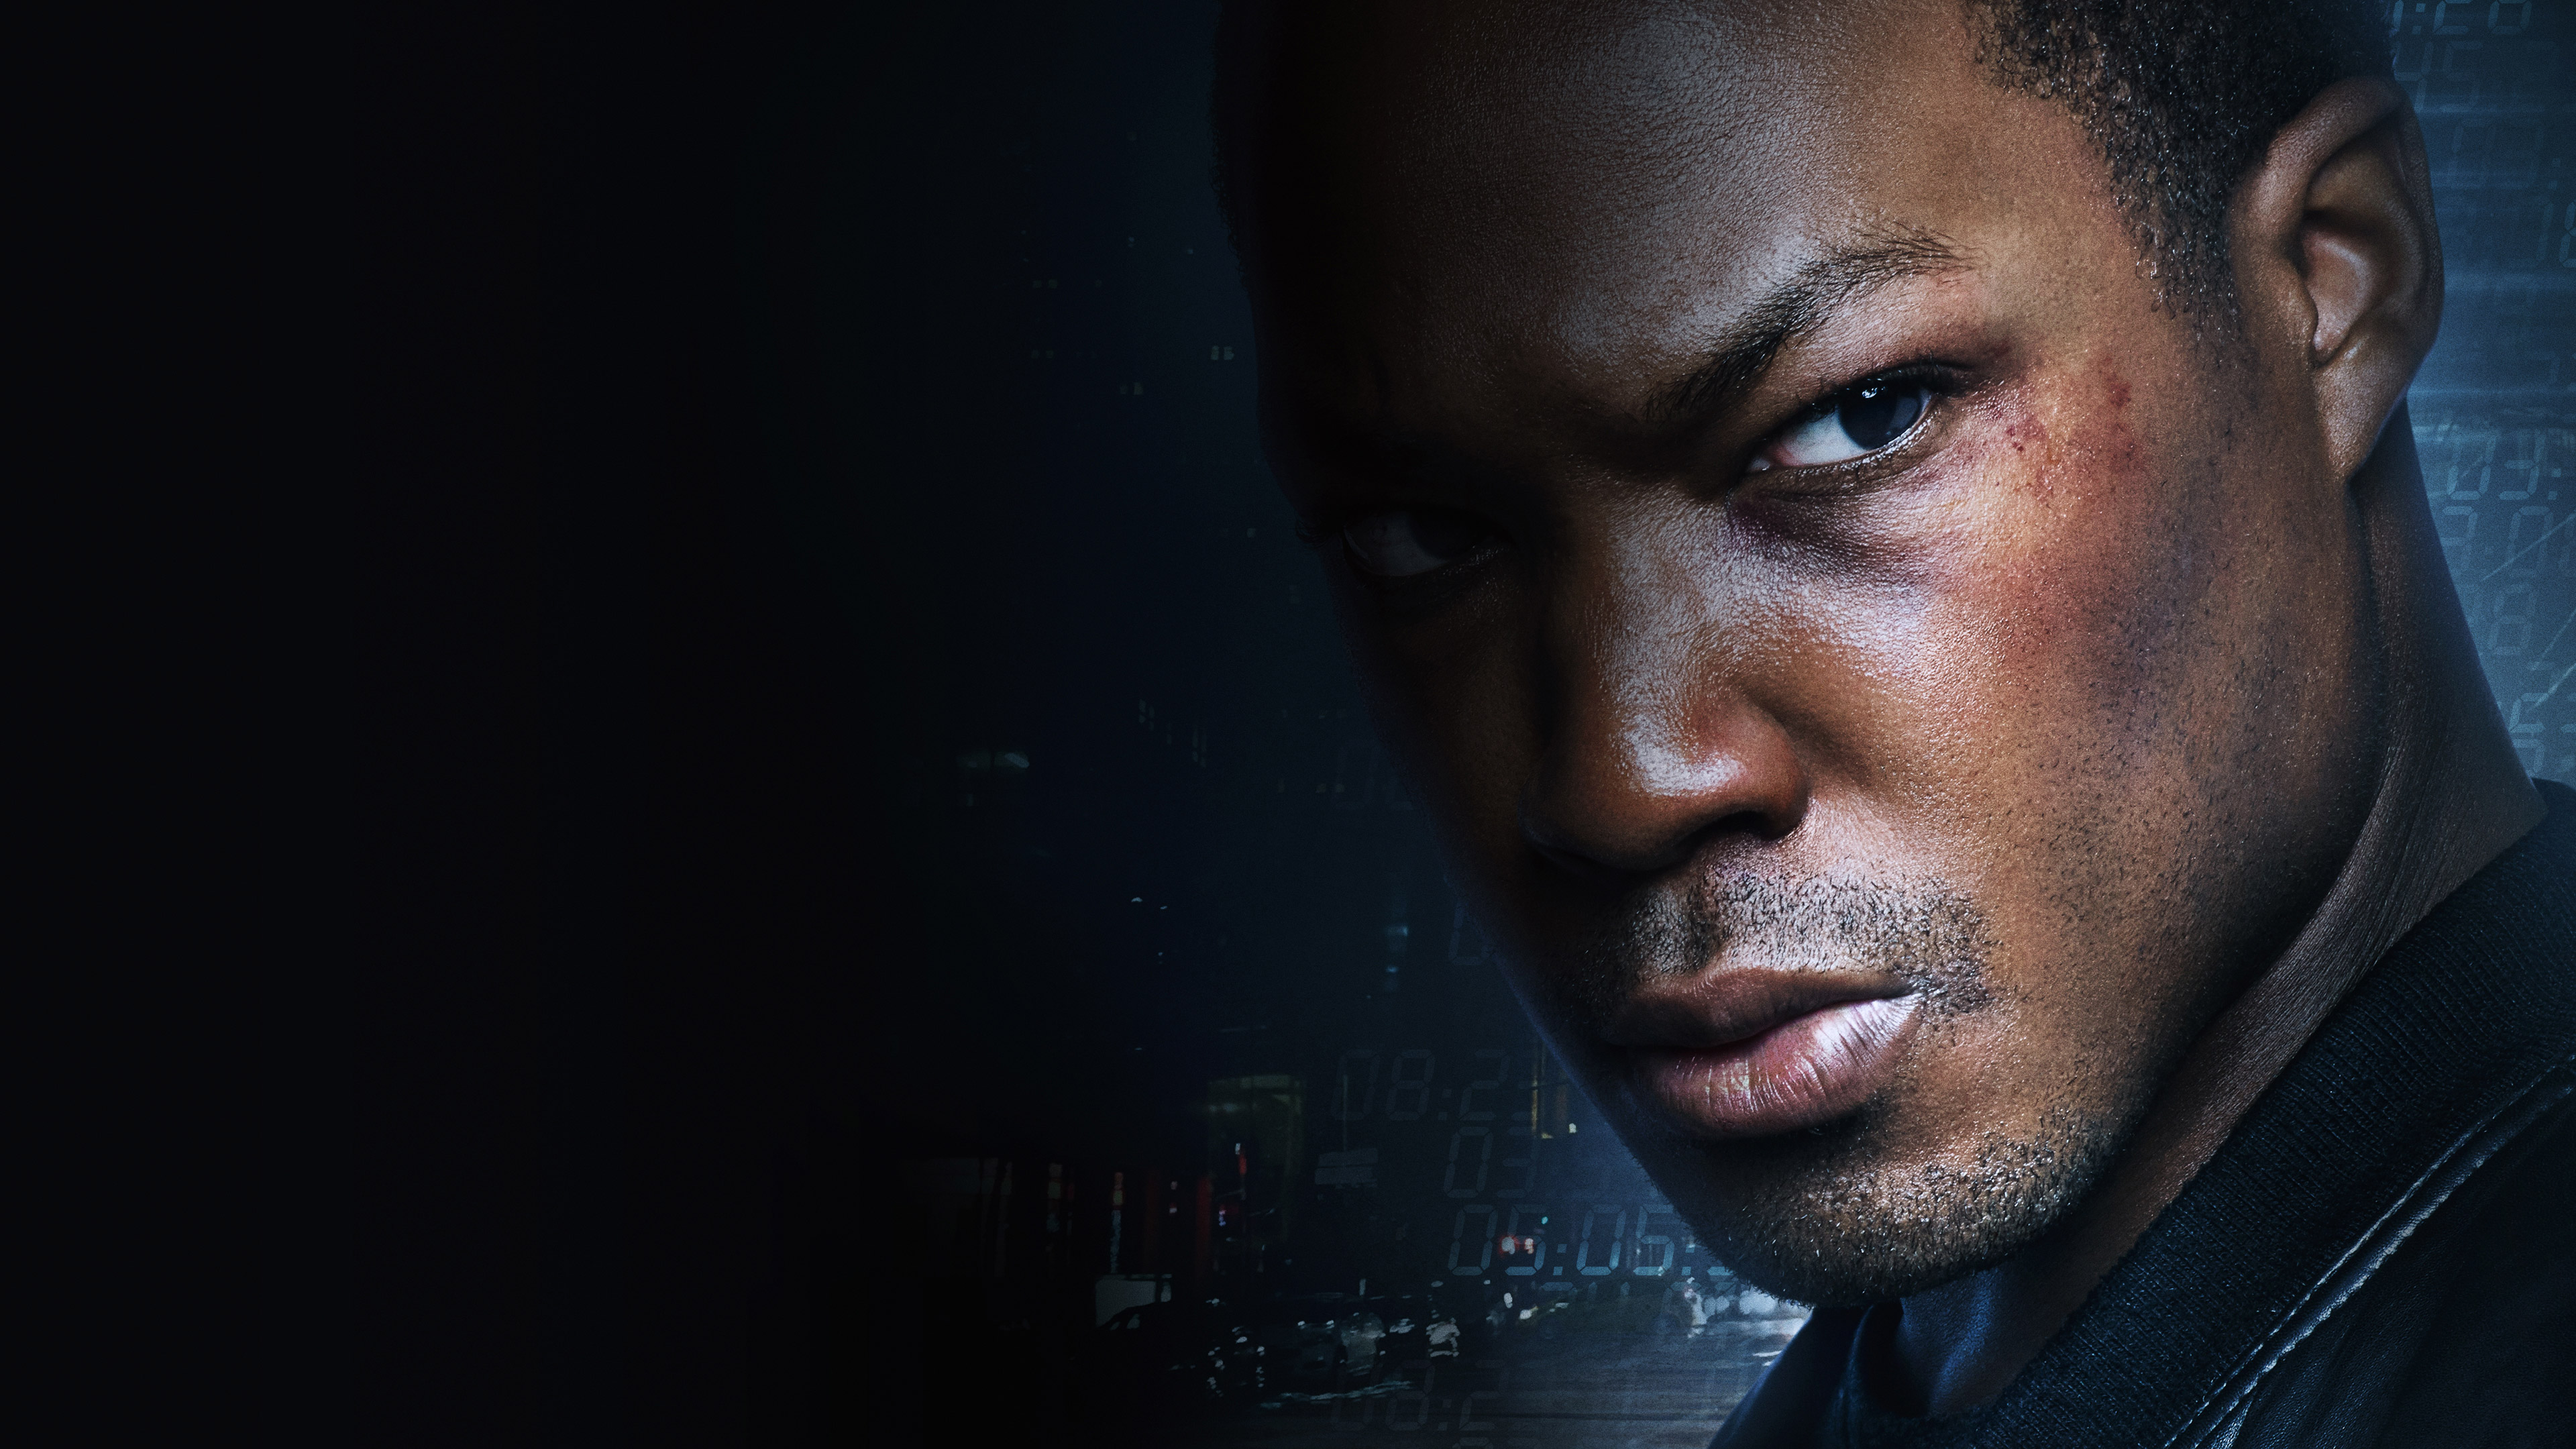 24 Legacy Wallpapers